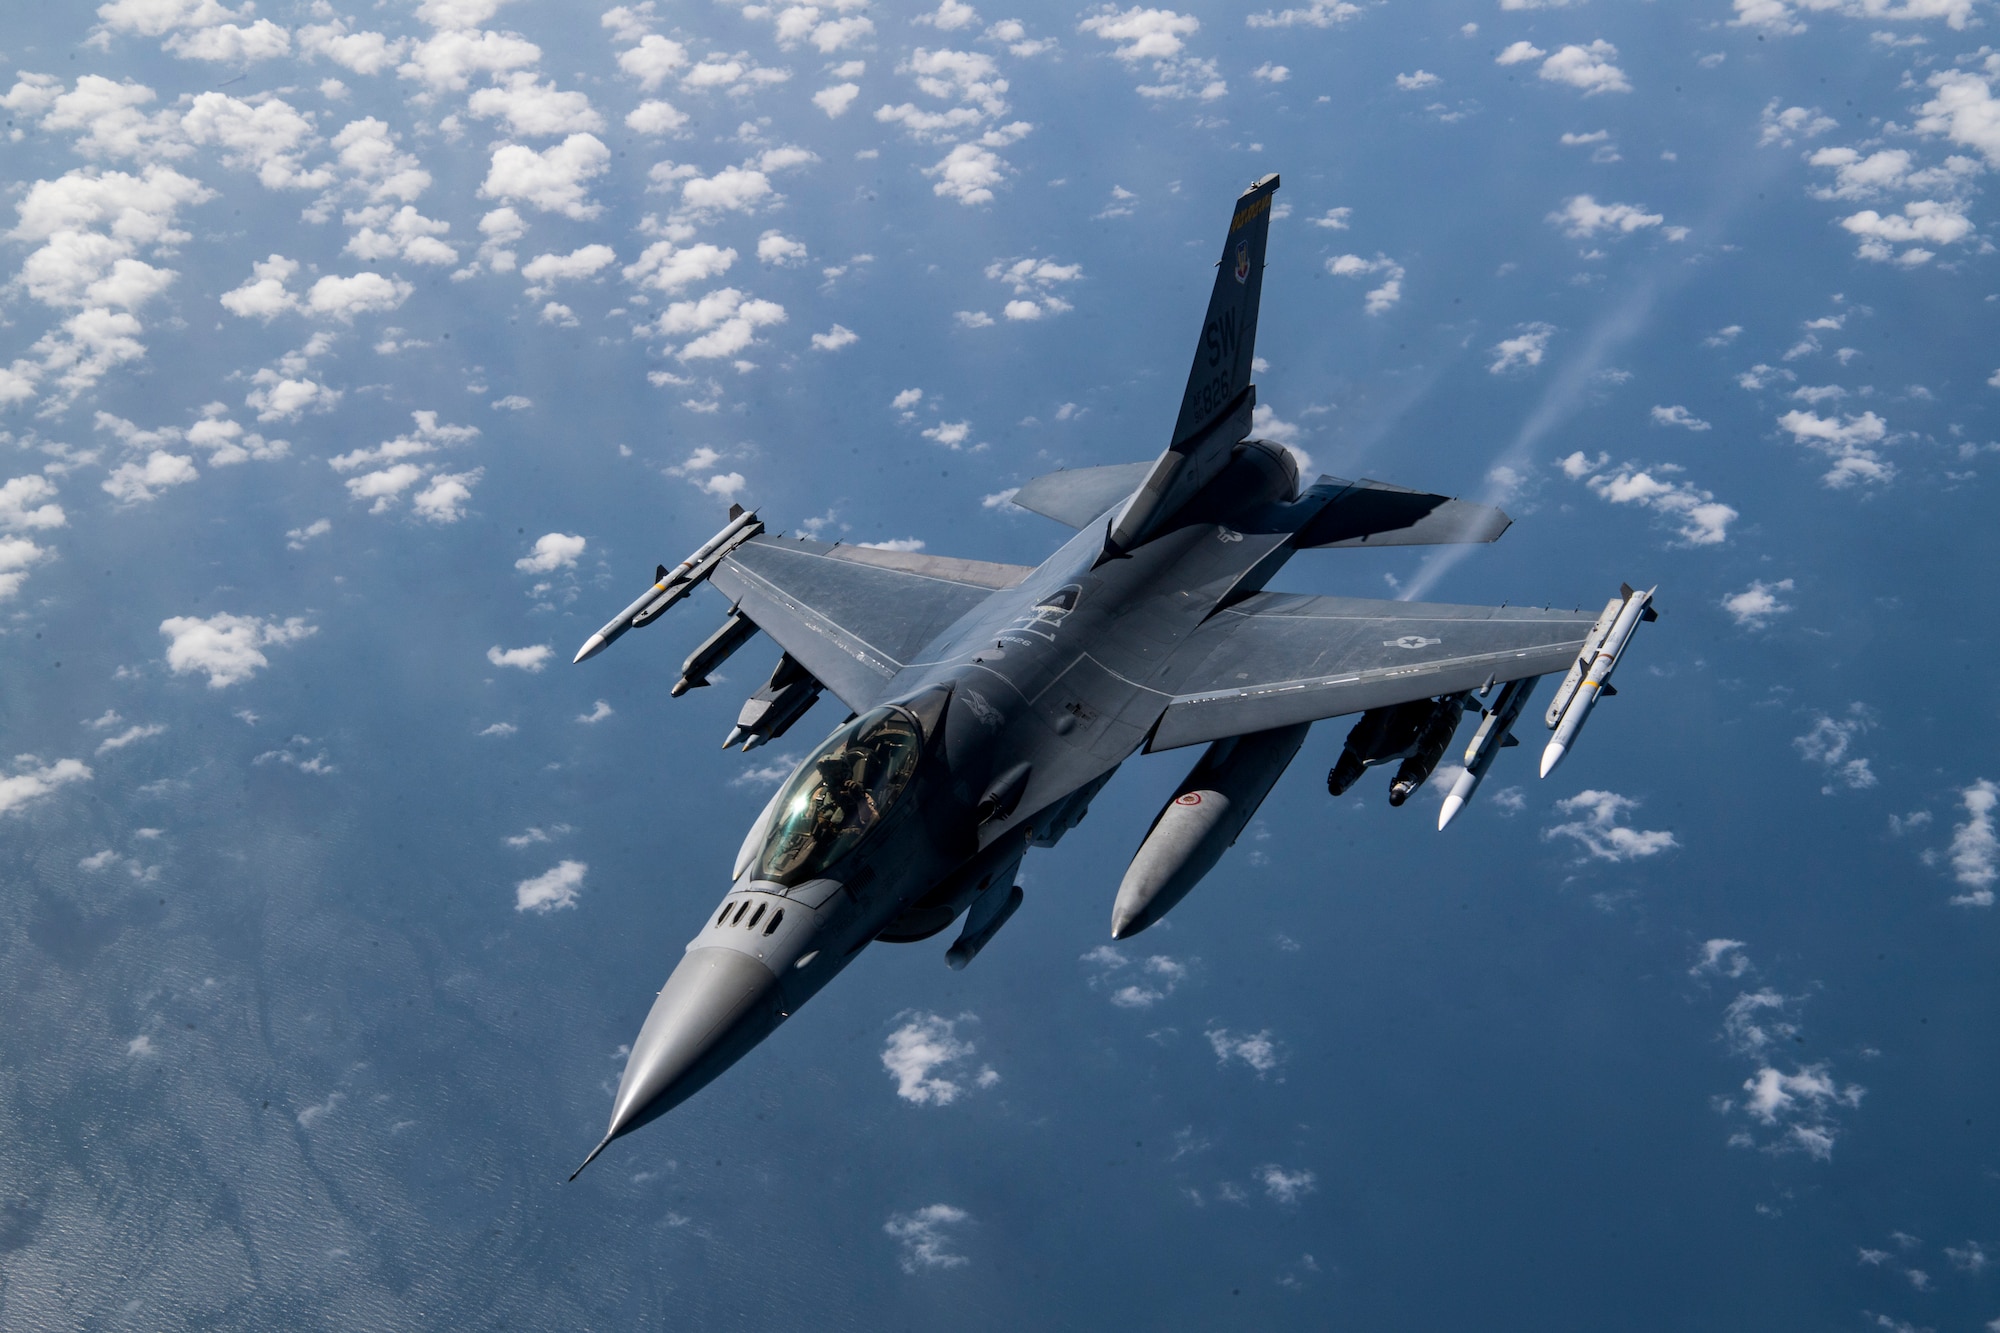 A U.S. Air Force F-16 Fighting Falcon flies over Afghanistan, March 17, 2020. The F-16 Fighting Falcon is a compact, multi-role fighter aircraft that delivers war- winning airpower to the U.S. Central Command area of responsibility. (U.S. Air Force photo by Tech. Sgt. Matthew Lotz)